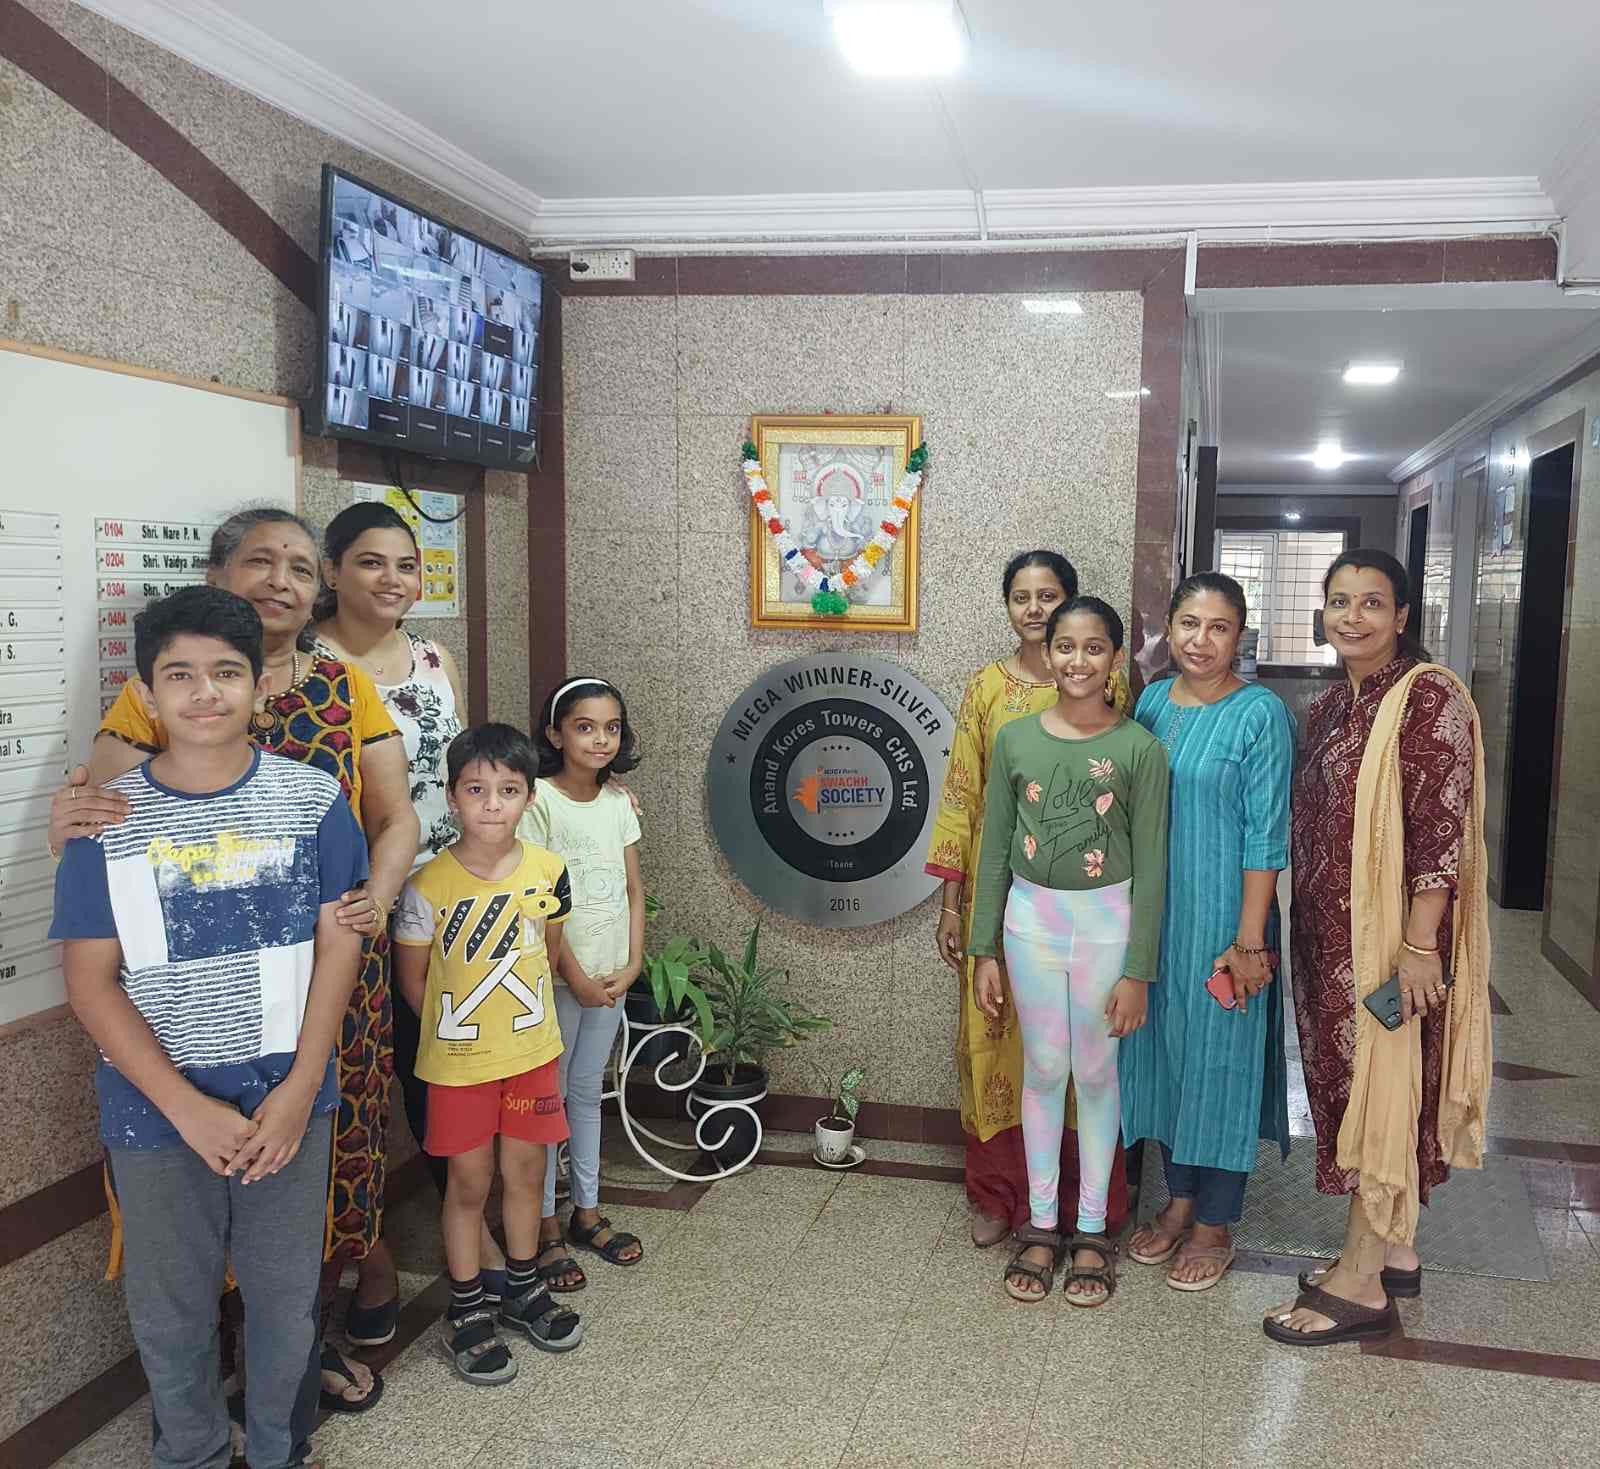 Residents of Anand Society, Kores Towers, Thane